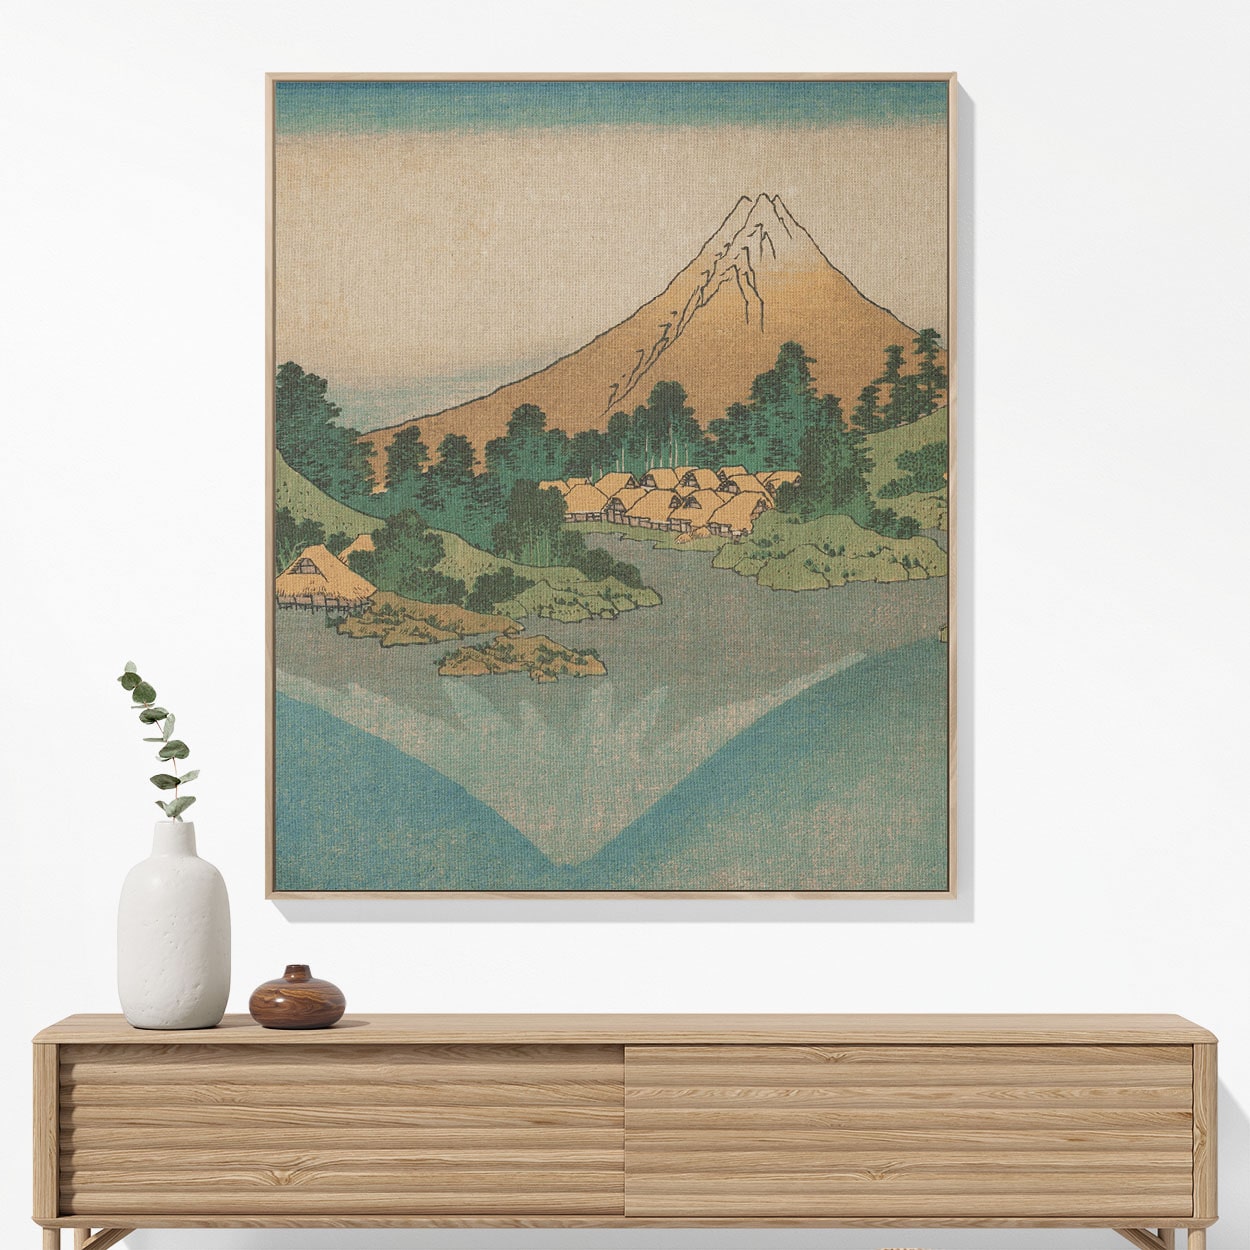 Japanese Mountain Woven Blanket Woven Blanket Hanging on a Wall as Framed Wall Art